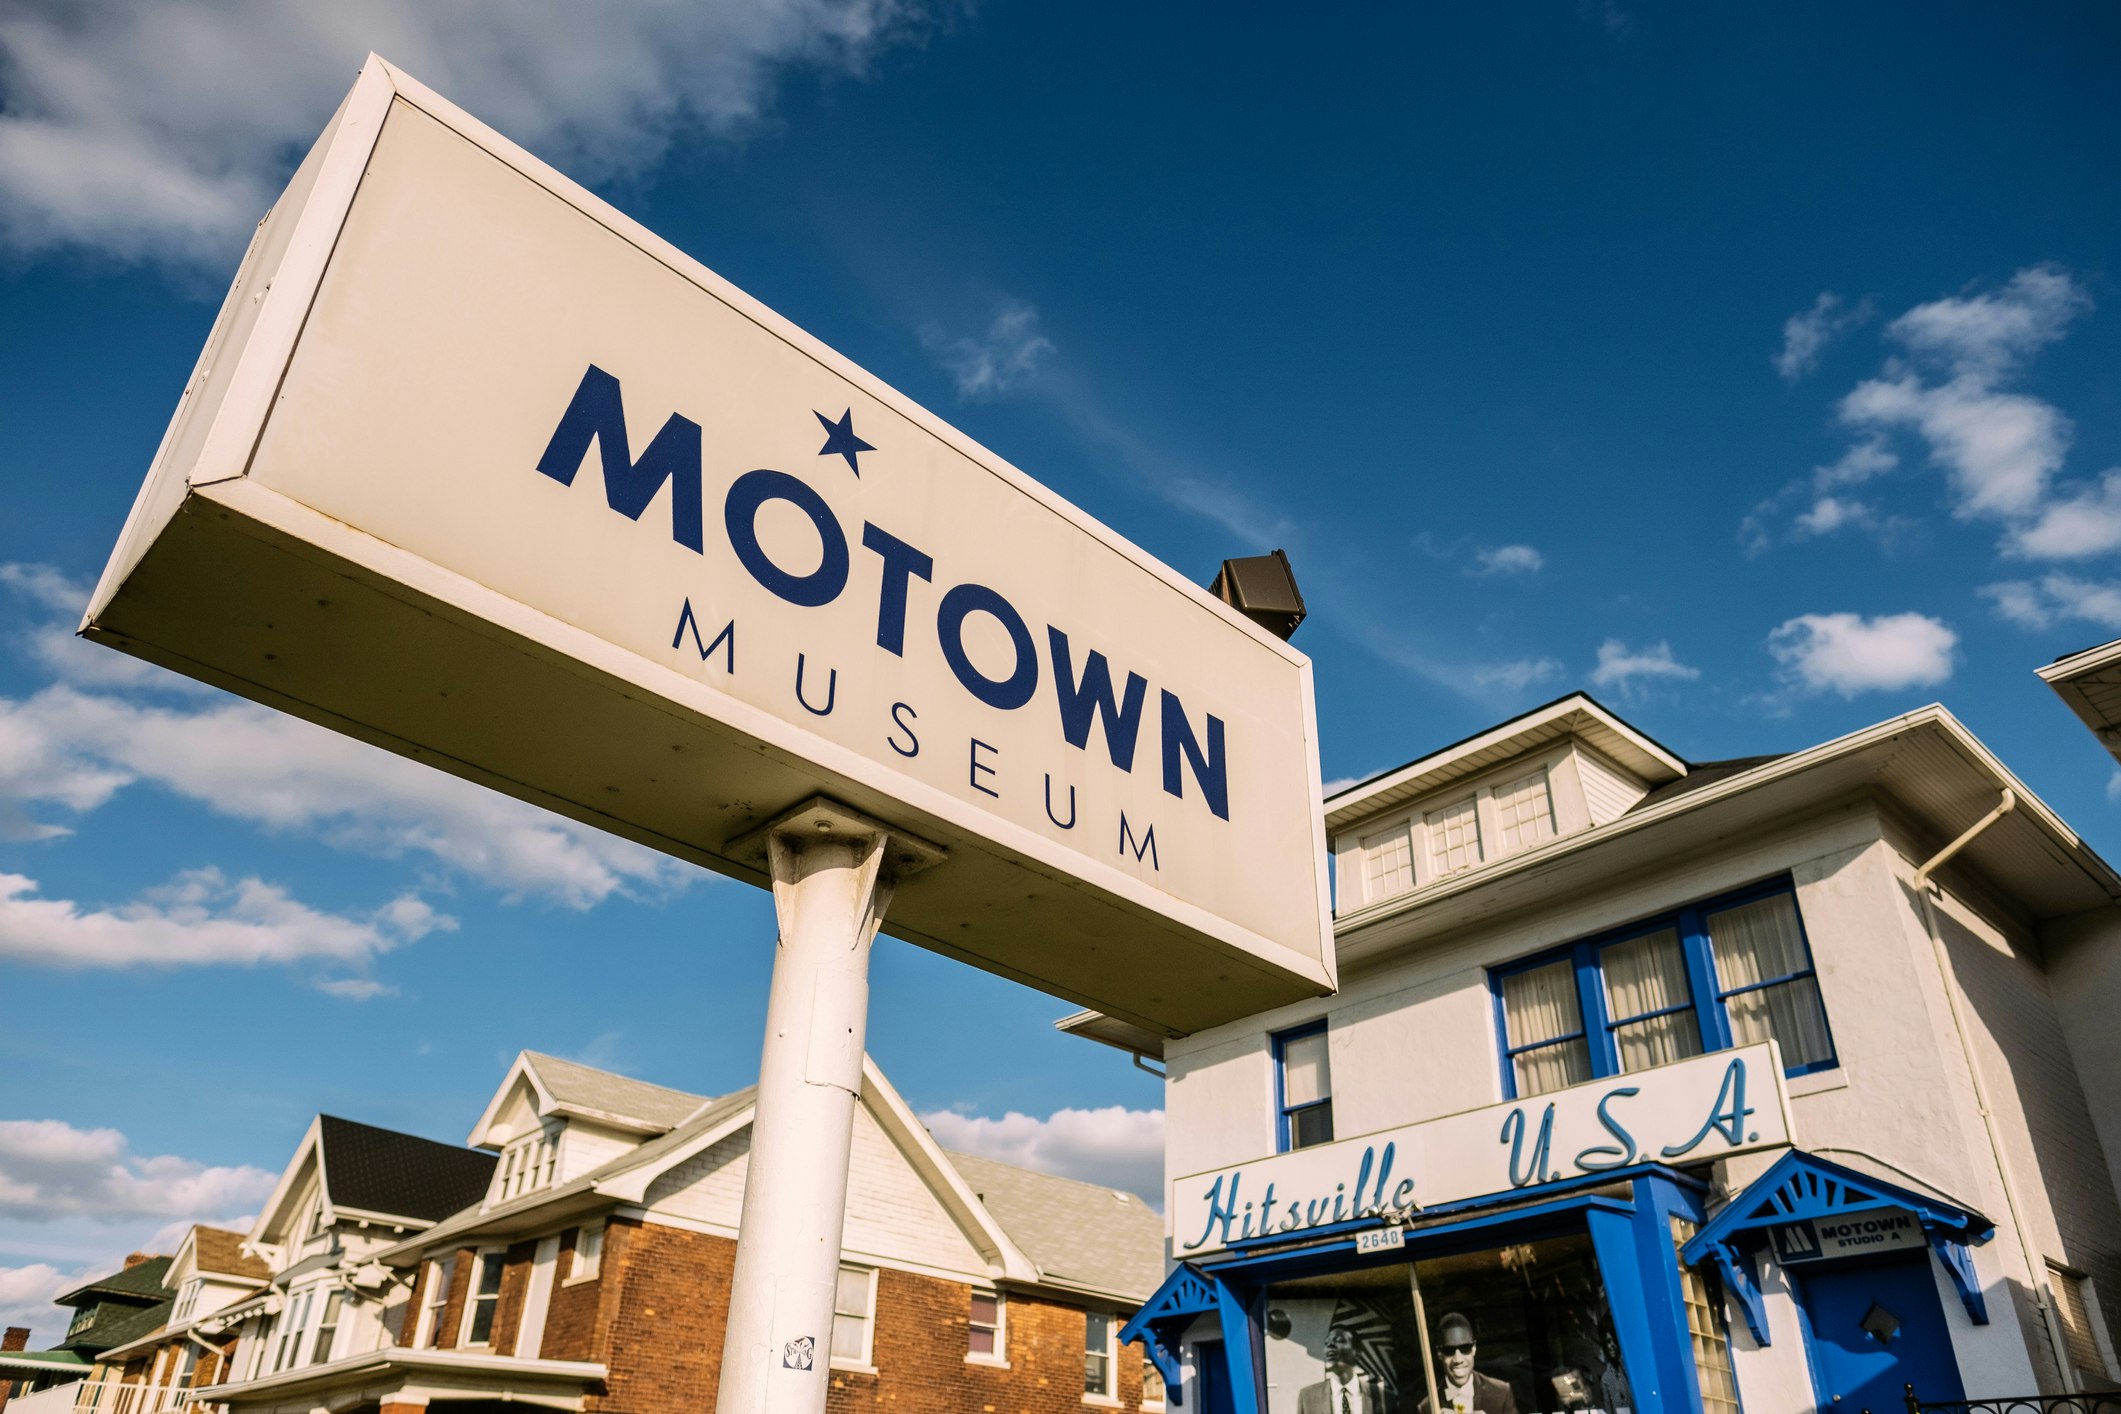 The Motown Museum in the original location of Motown Records